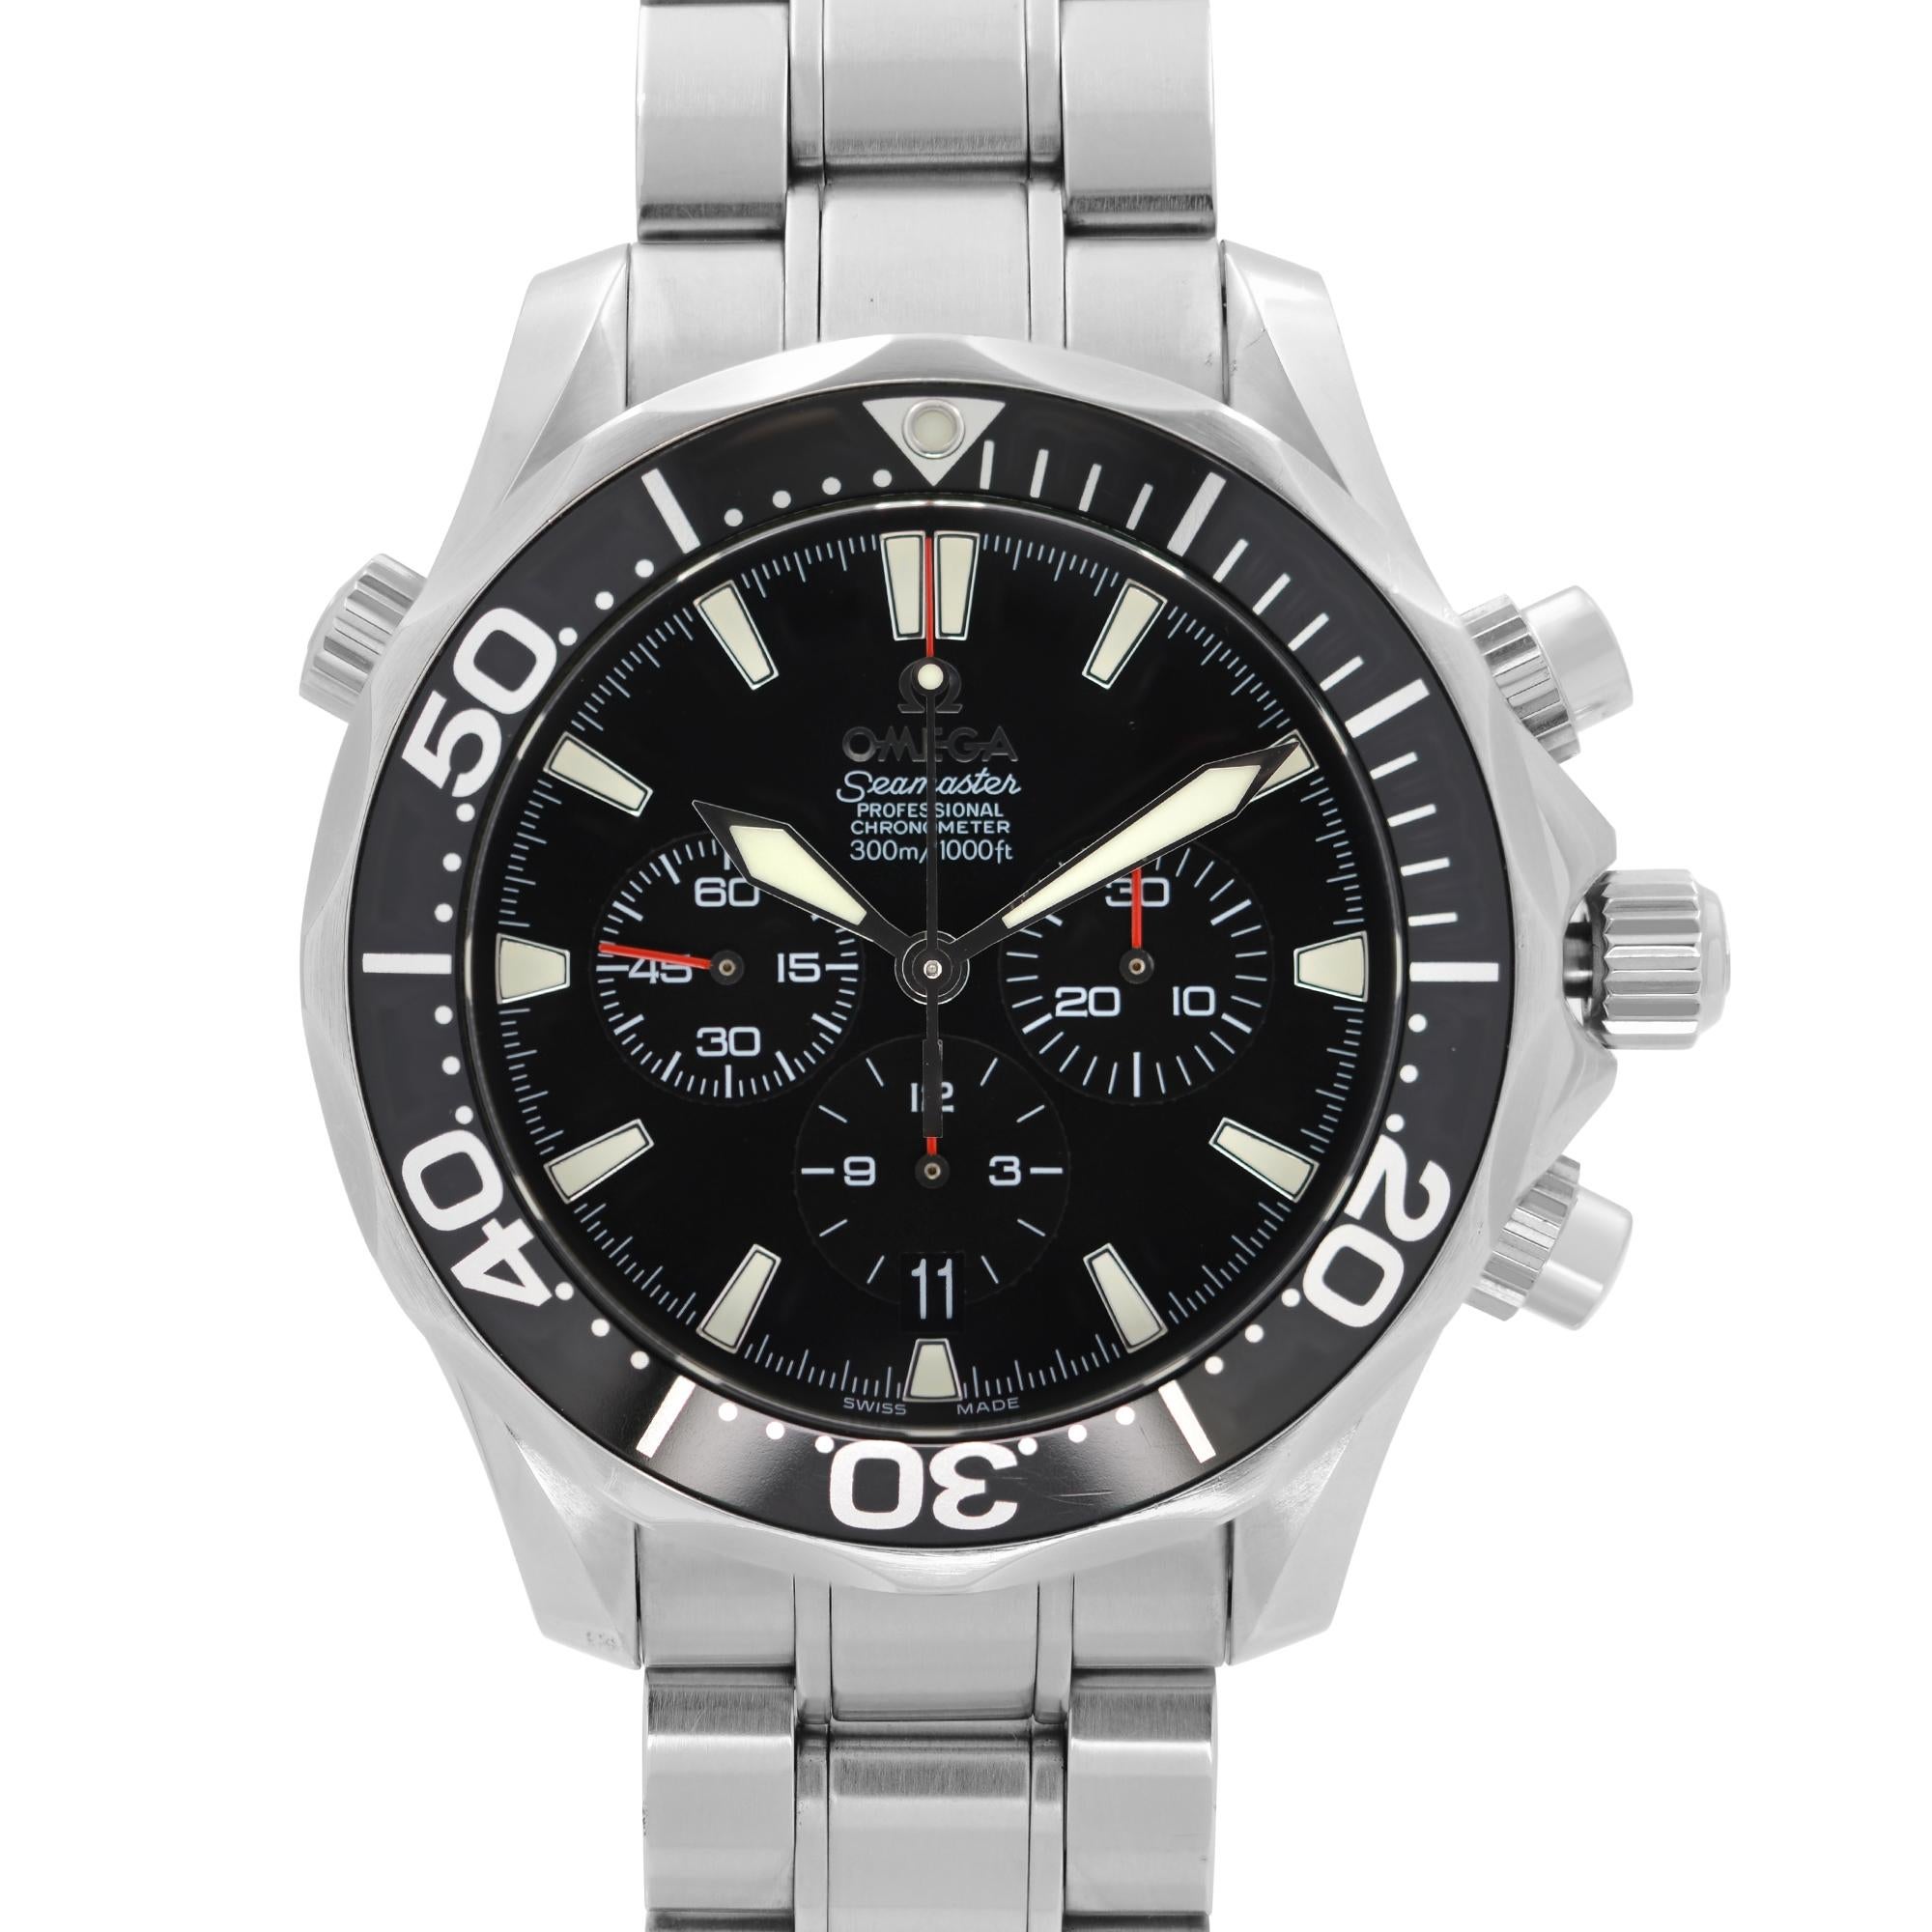 Pre Owned Omega Seamaster Diver 300M Steel Chronograph Black Dial Men's Watch 2594.52.00. This Beautiful Timepiece is Powered by Mechanical (Automatic) Movement And Features: Round Stainless steel Case & Bracelet, Black Unidirectional Stainless